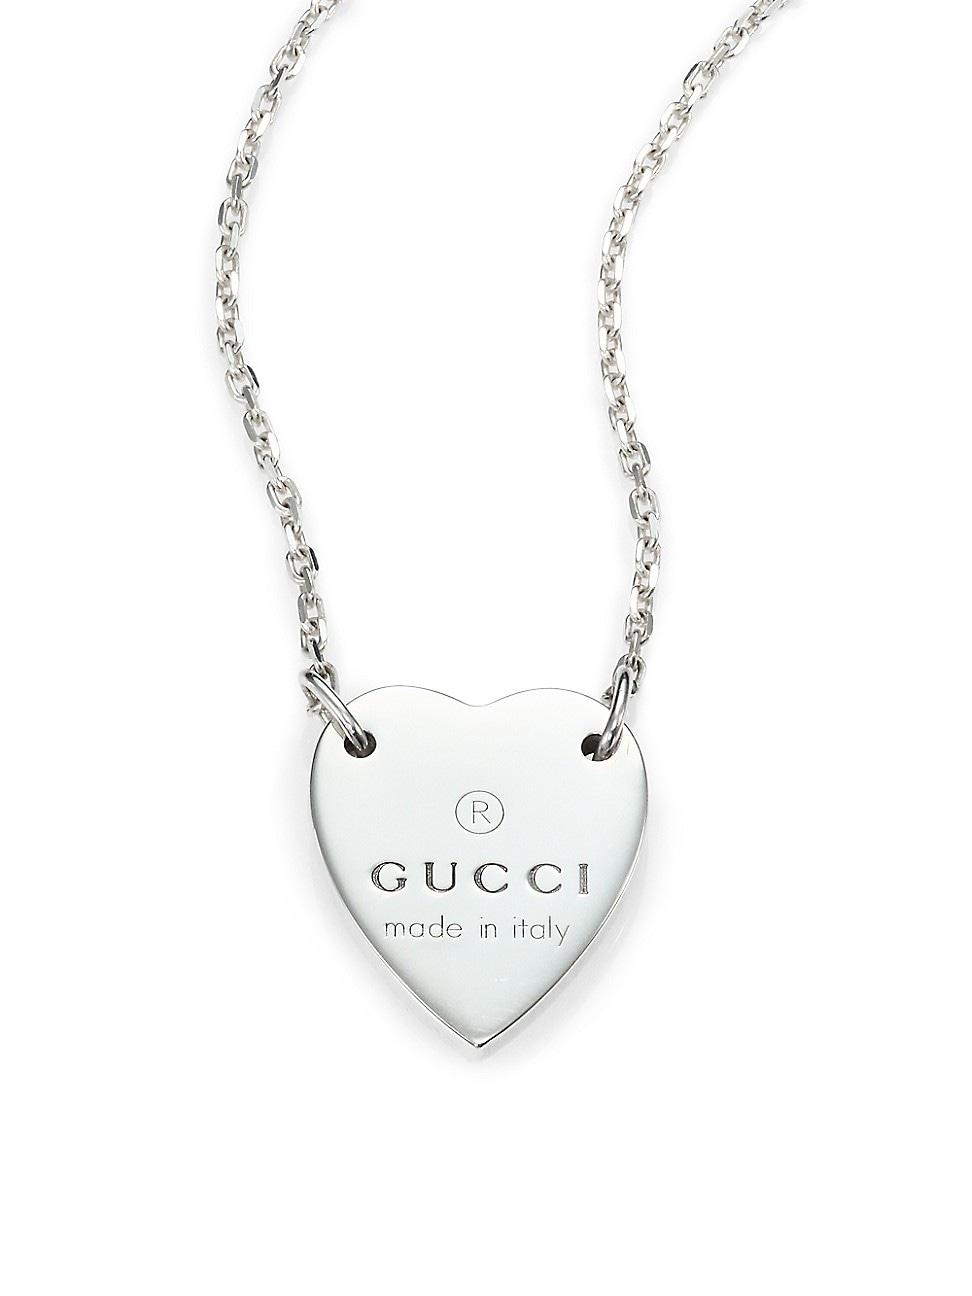 gucci sterling silver heart pendant necklace